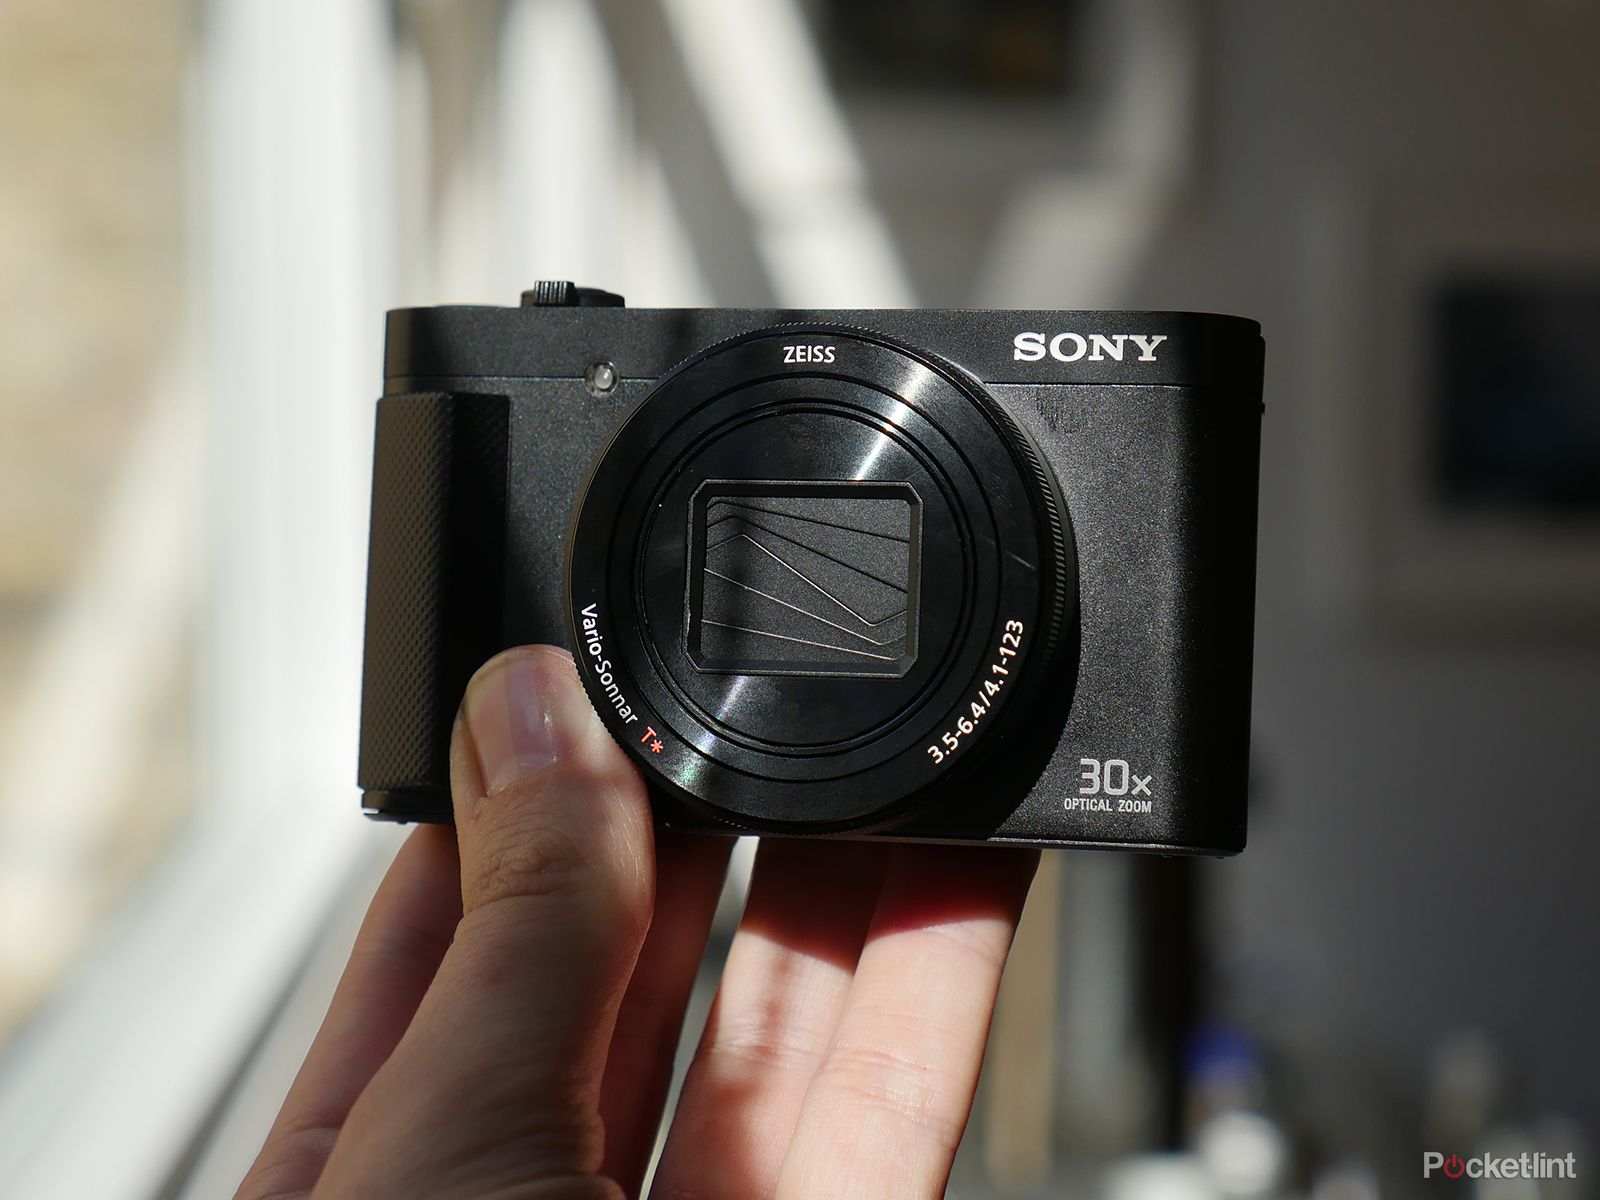 sony cyber shot hx90 review travel compact gives panasonic tz70 something to chew over image 3